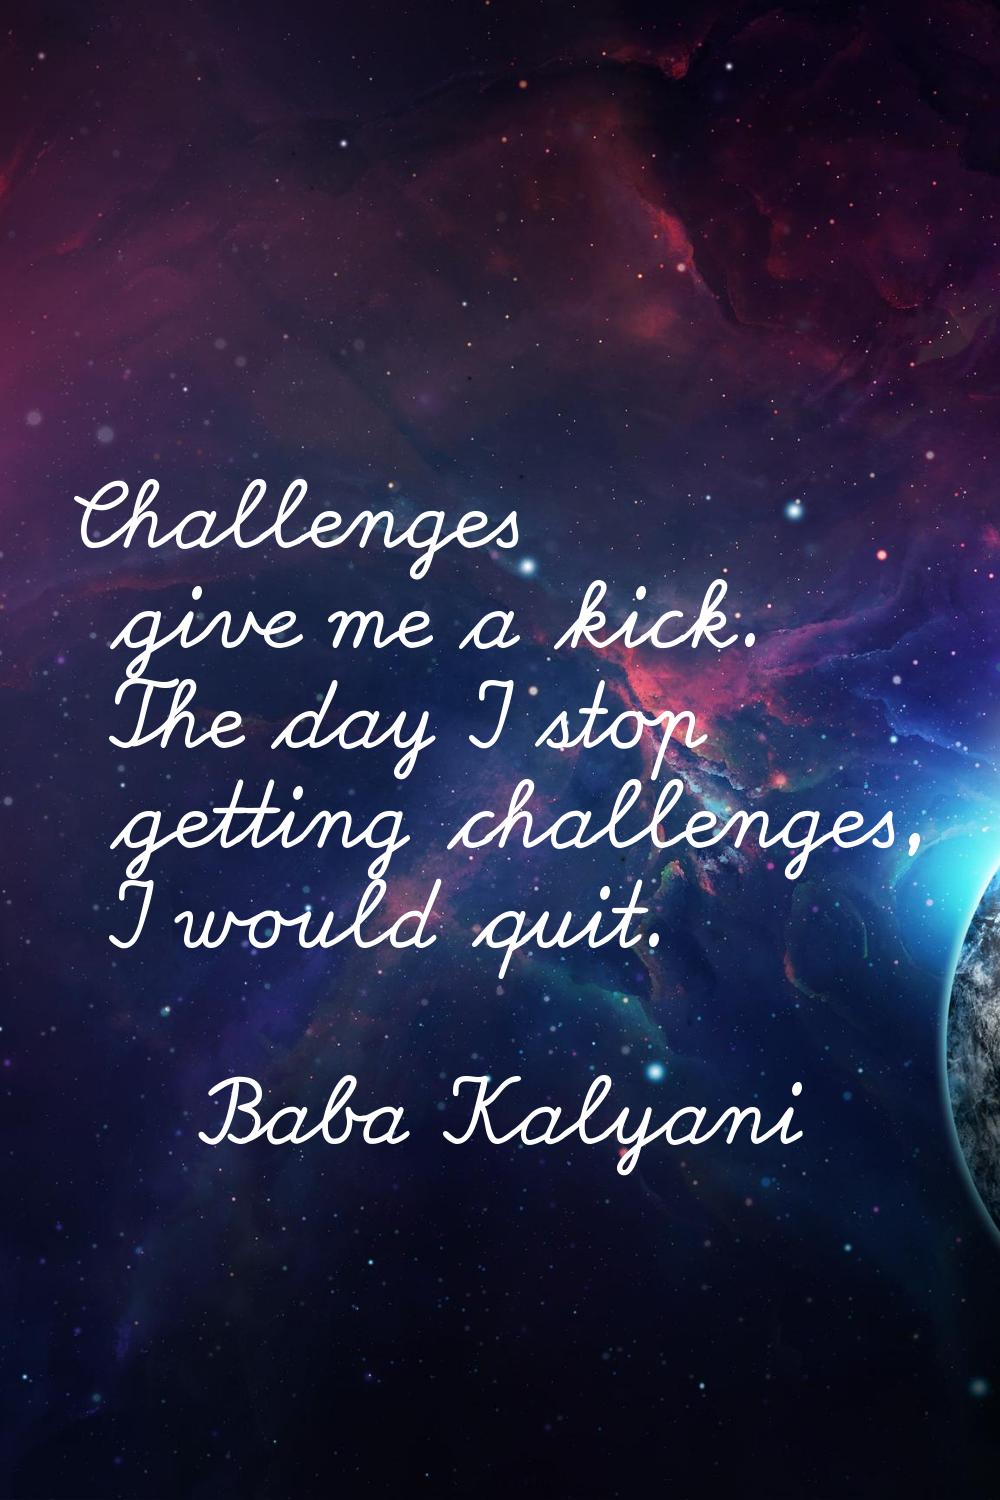 Challenges give me a kick. The day I stop getting challenges, I would quit.